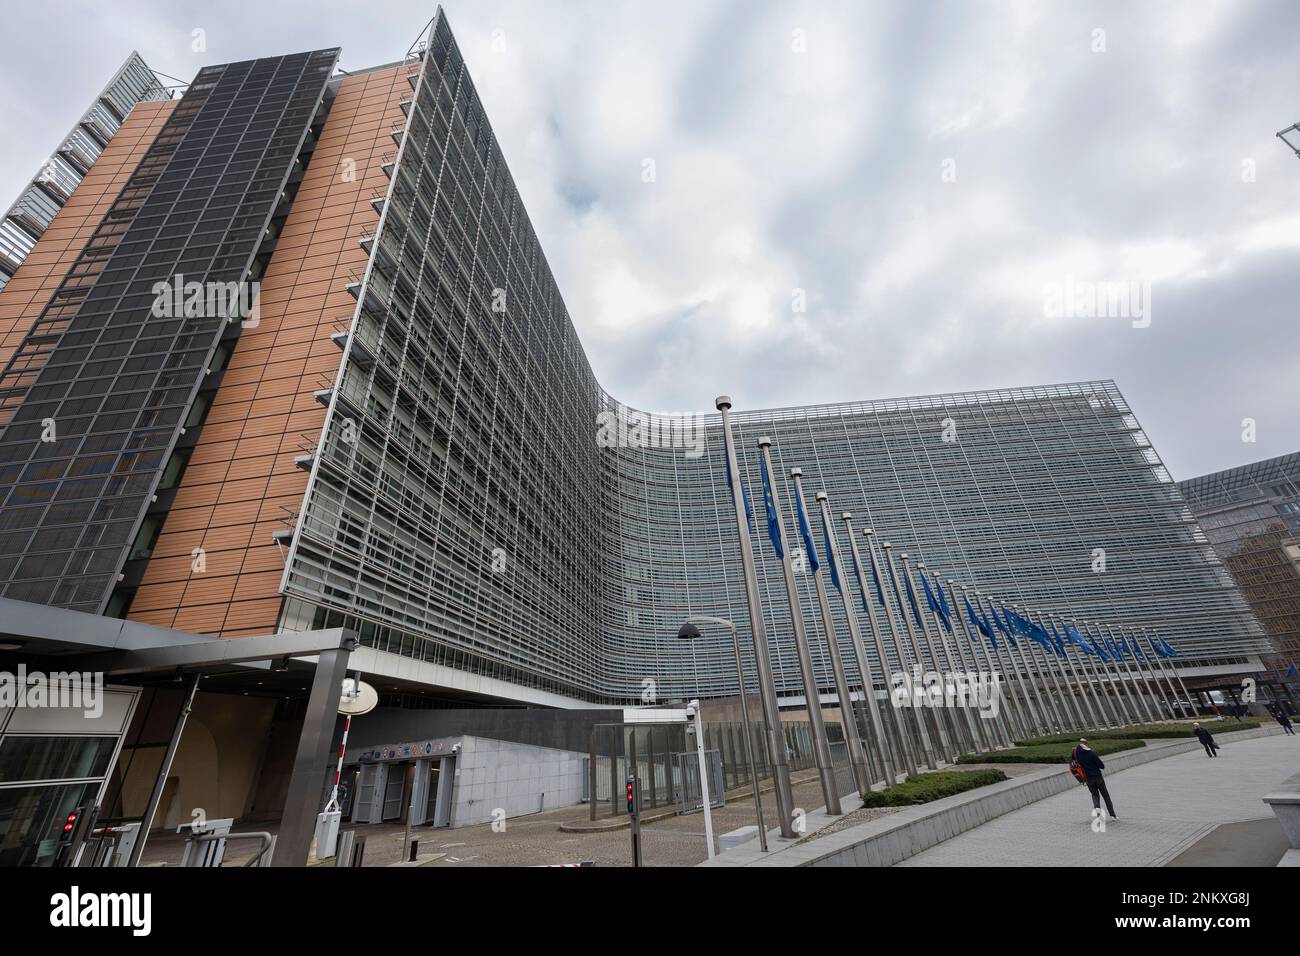 BRUSSELS, Belgium - February 23, 2023: Berlaymont building, seat of the European Commission, with flags blowing in the wind in front of it Stock Photo